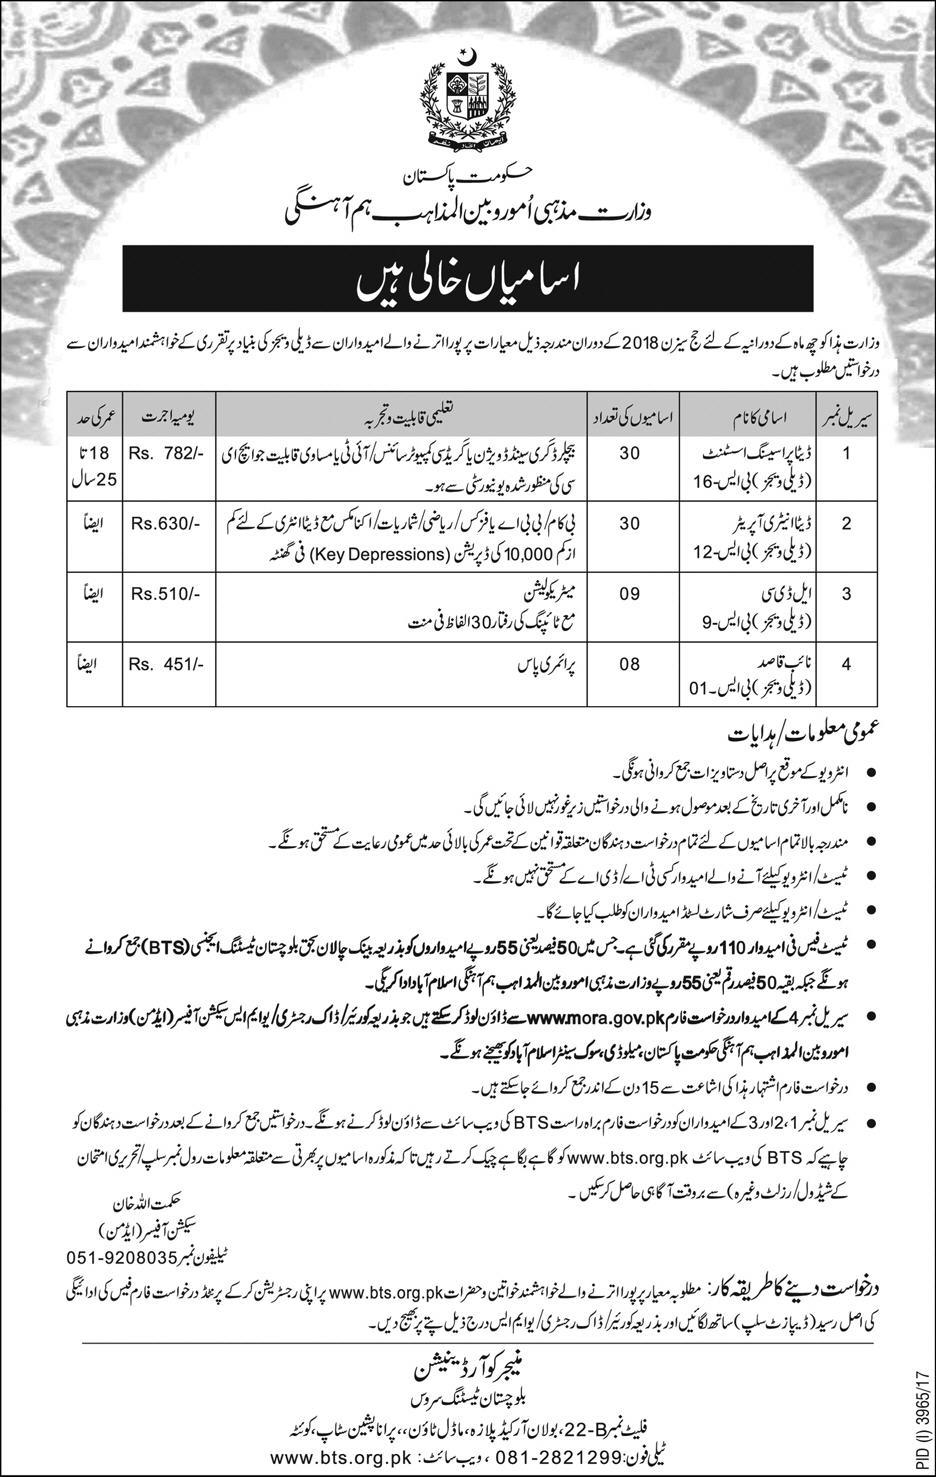 Islamabad Ministry of Religious Affairs and Interfaith Harmony 77 Jobs, 25 January 2018, Daily Express Newspaper